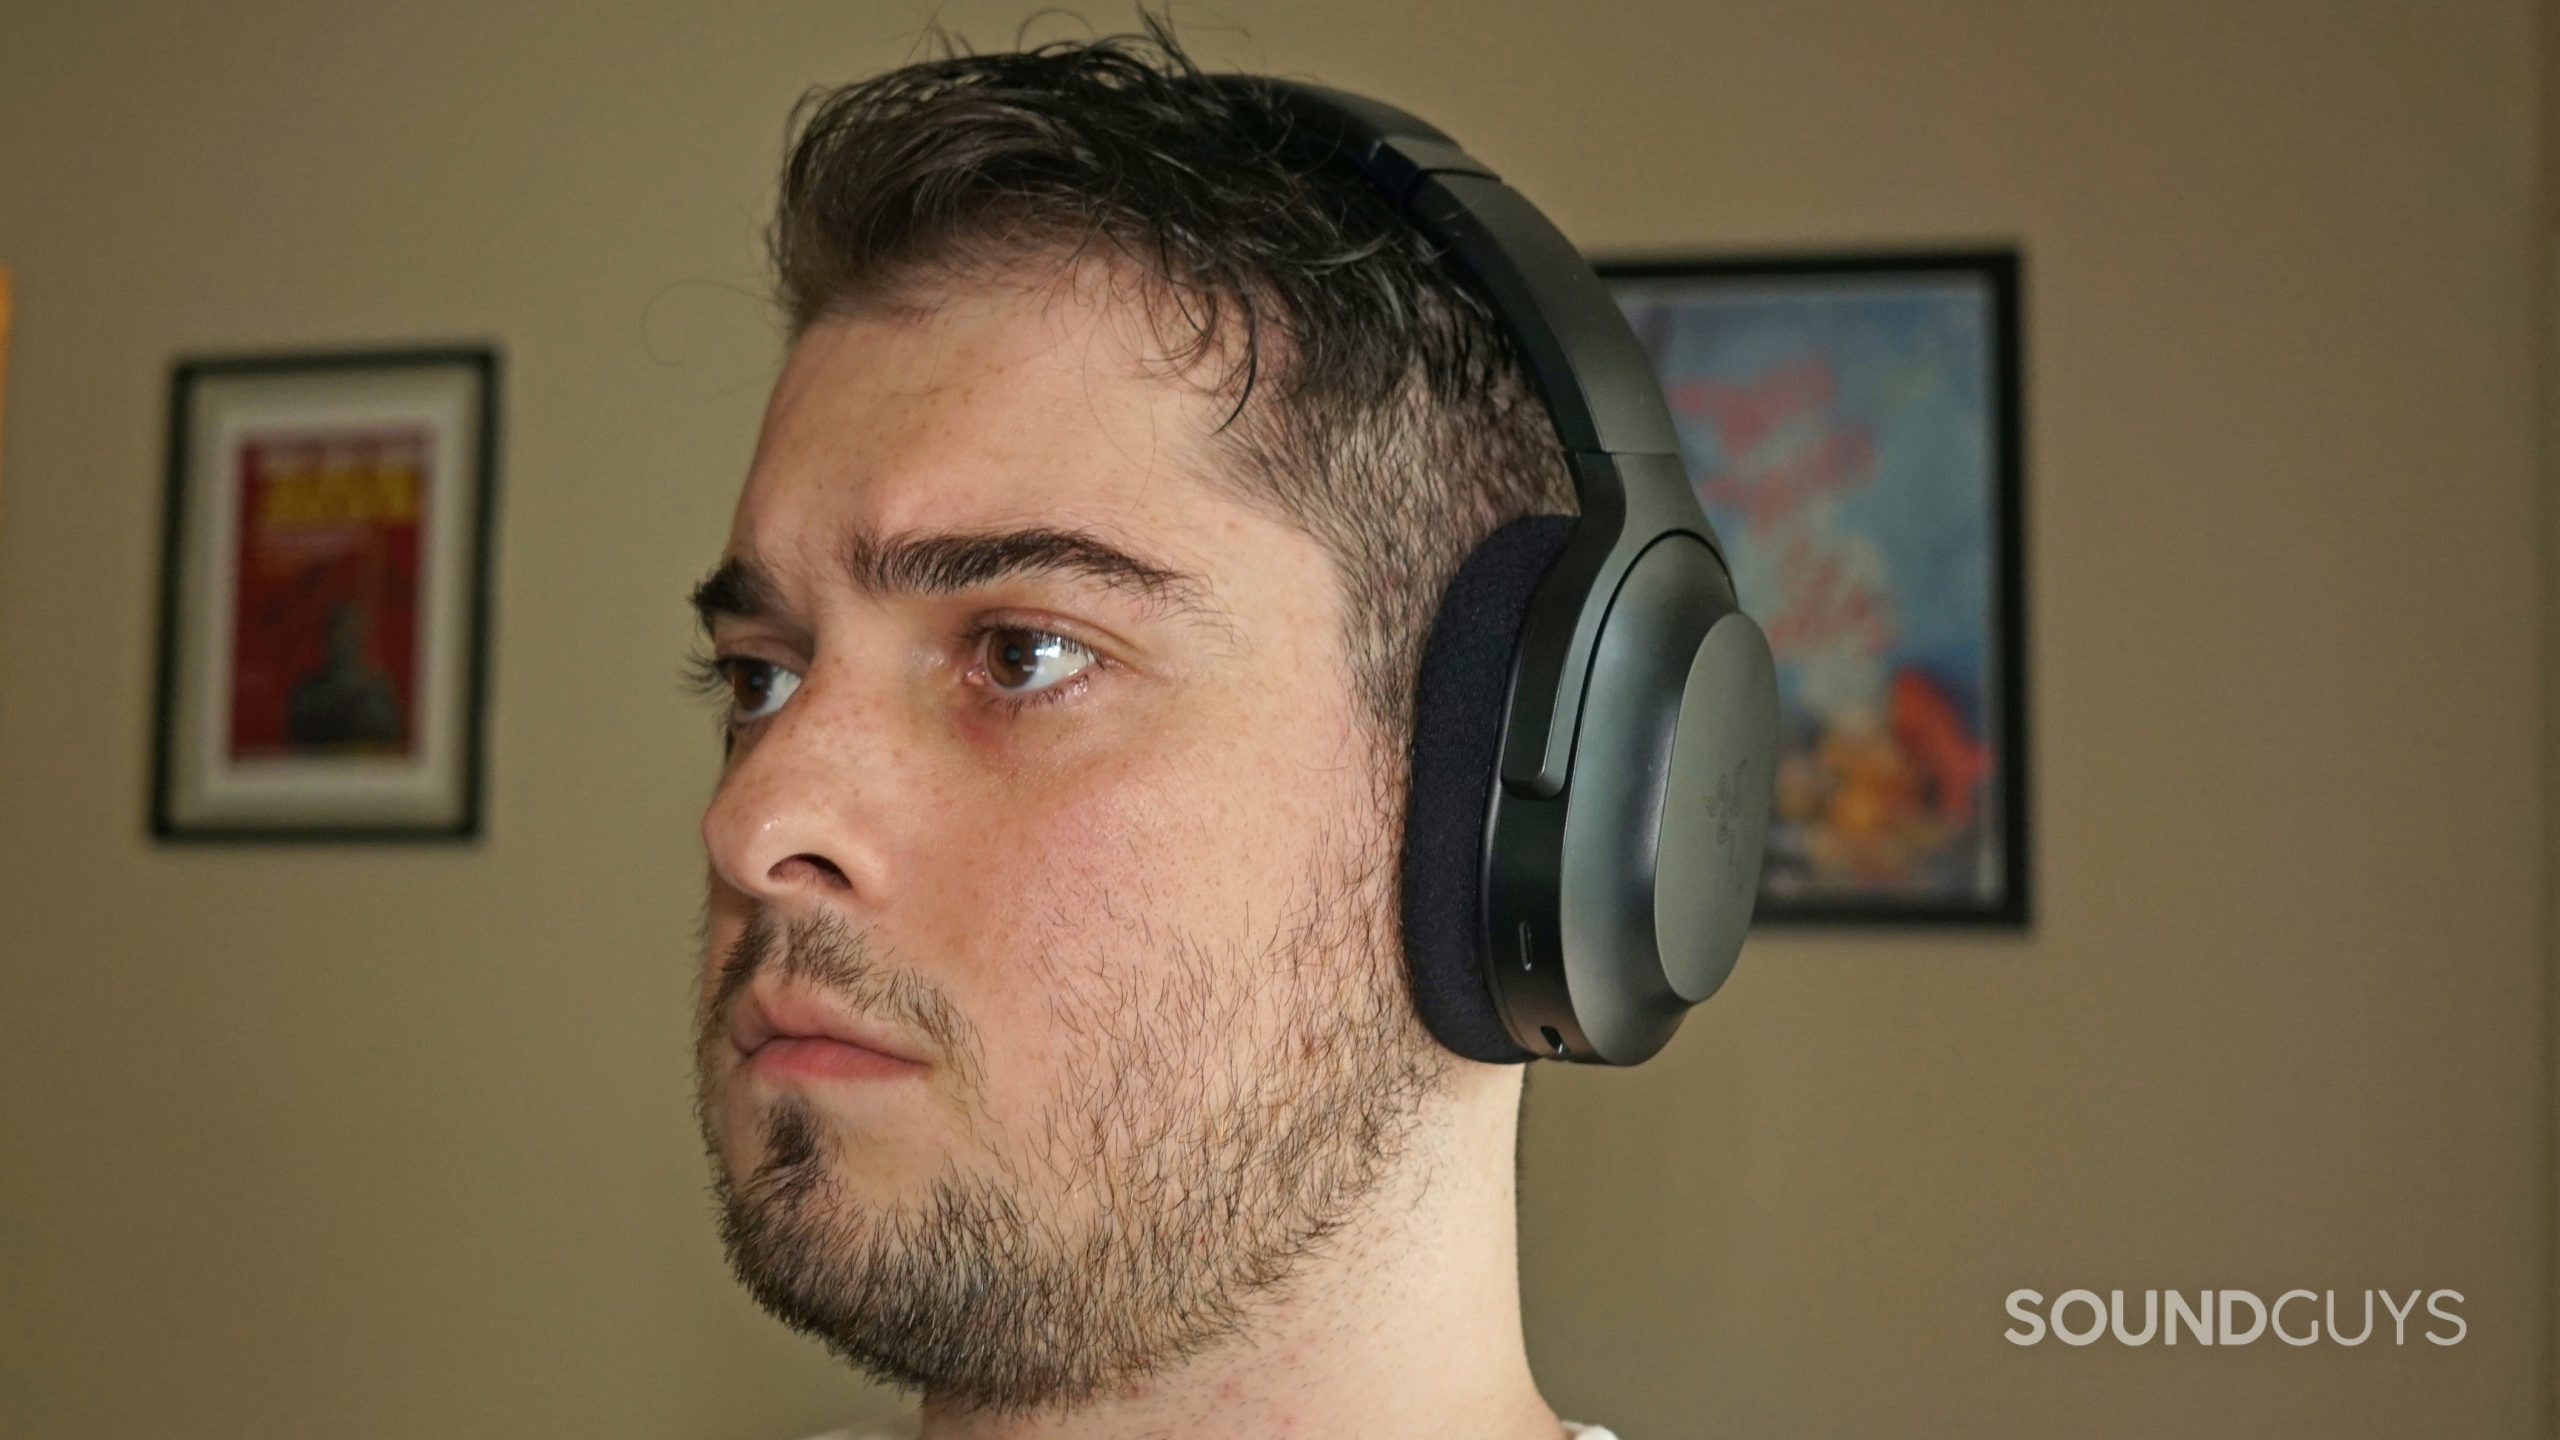 A man wears the Razer Barracuda gaming headset with a poster for My Brother, My Brother, and Me.